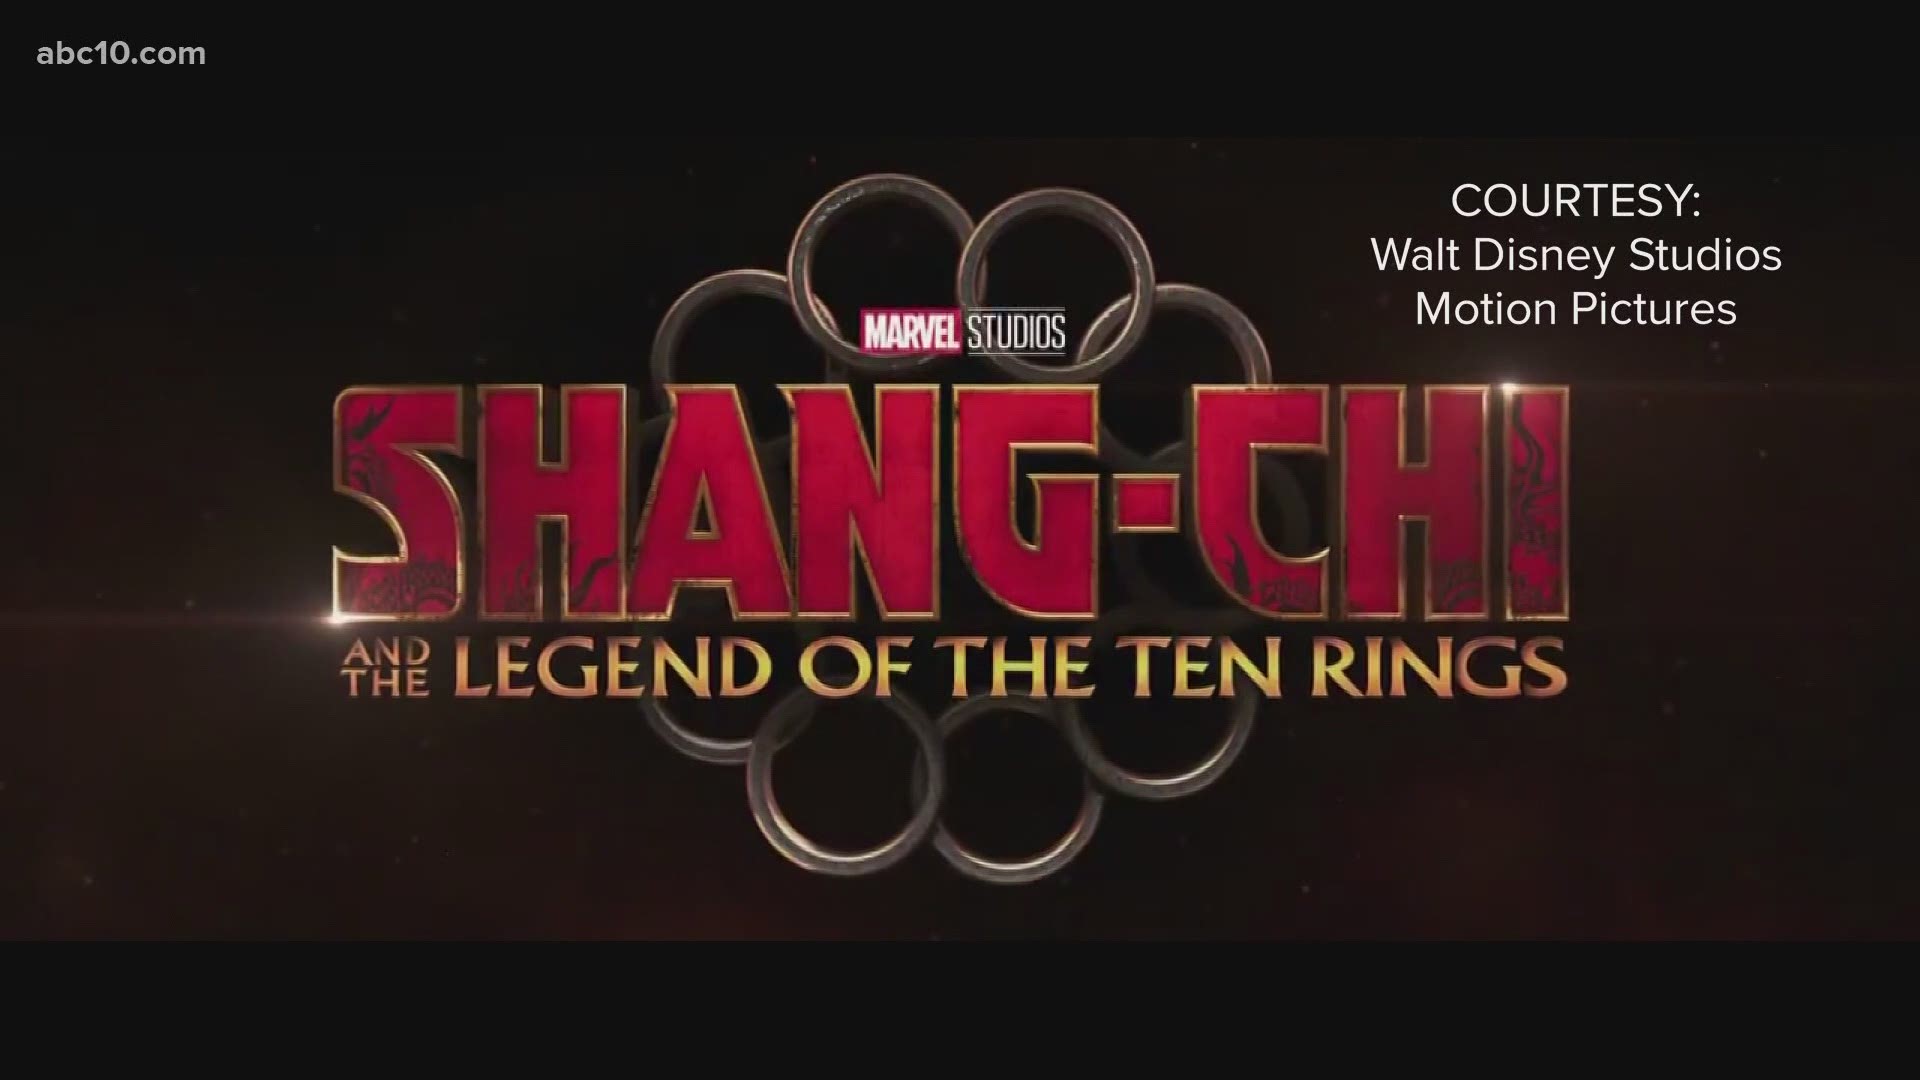 Marvel released a trailer for "Shang-Chi and the Legend of the Ten Rings" on Monday. Northern Californian Asian American community members are excited.